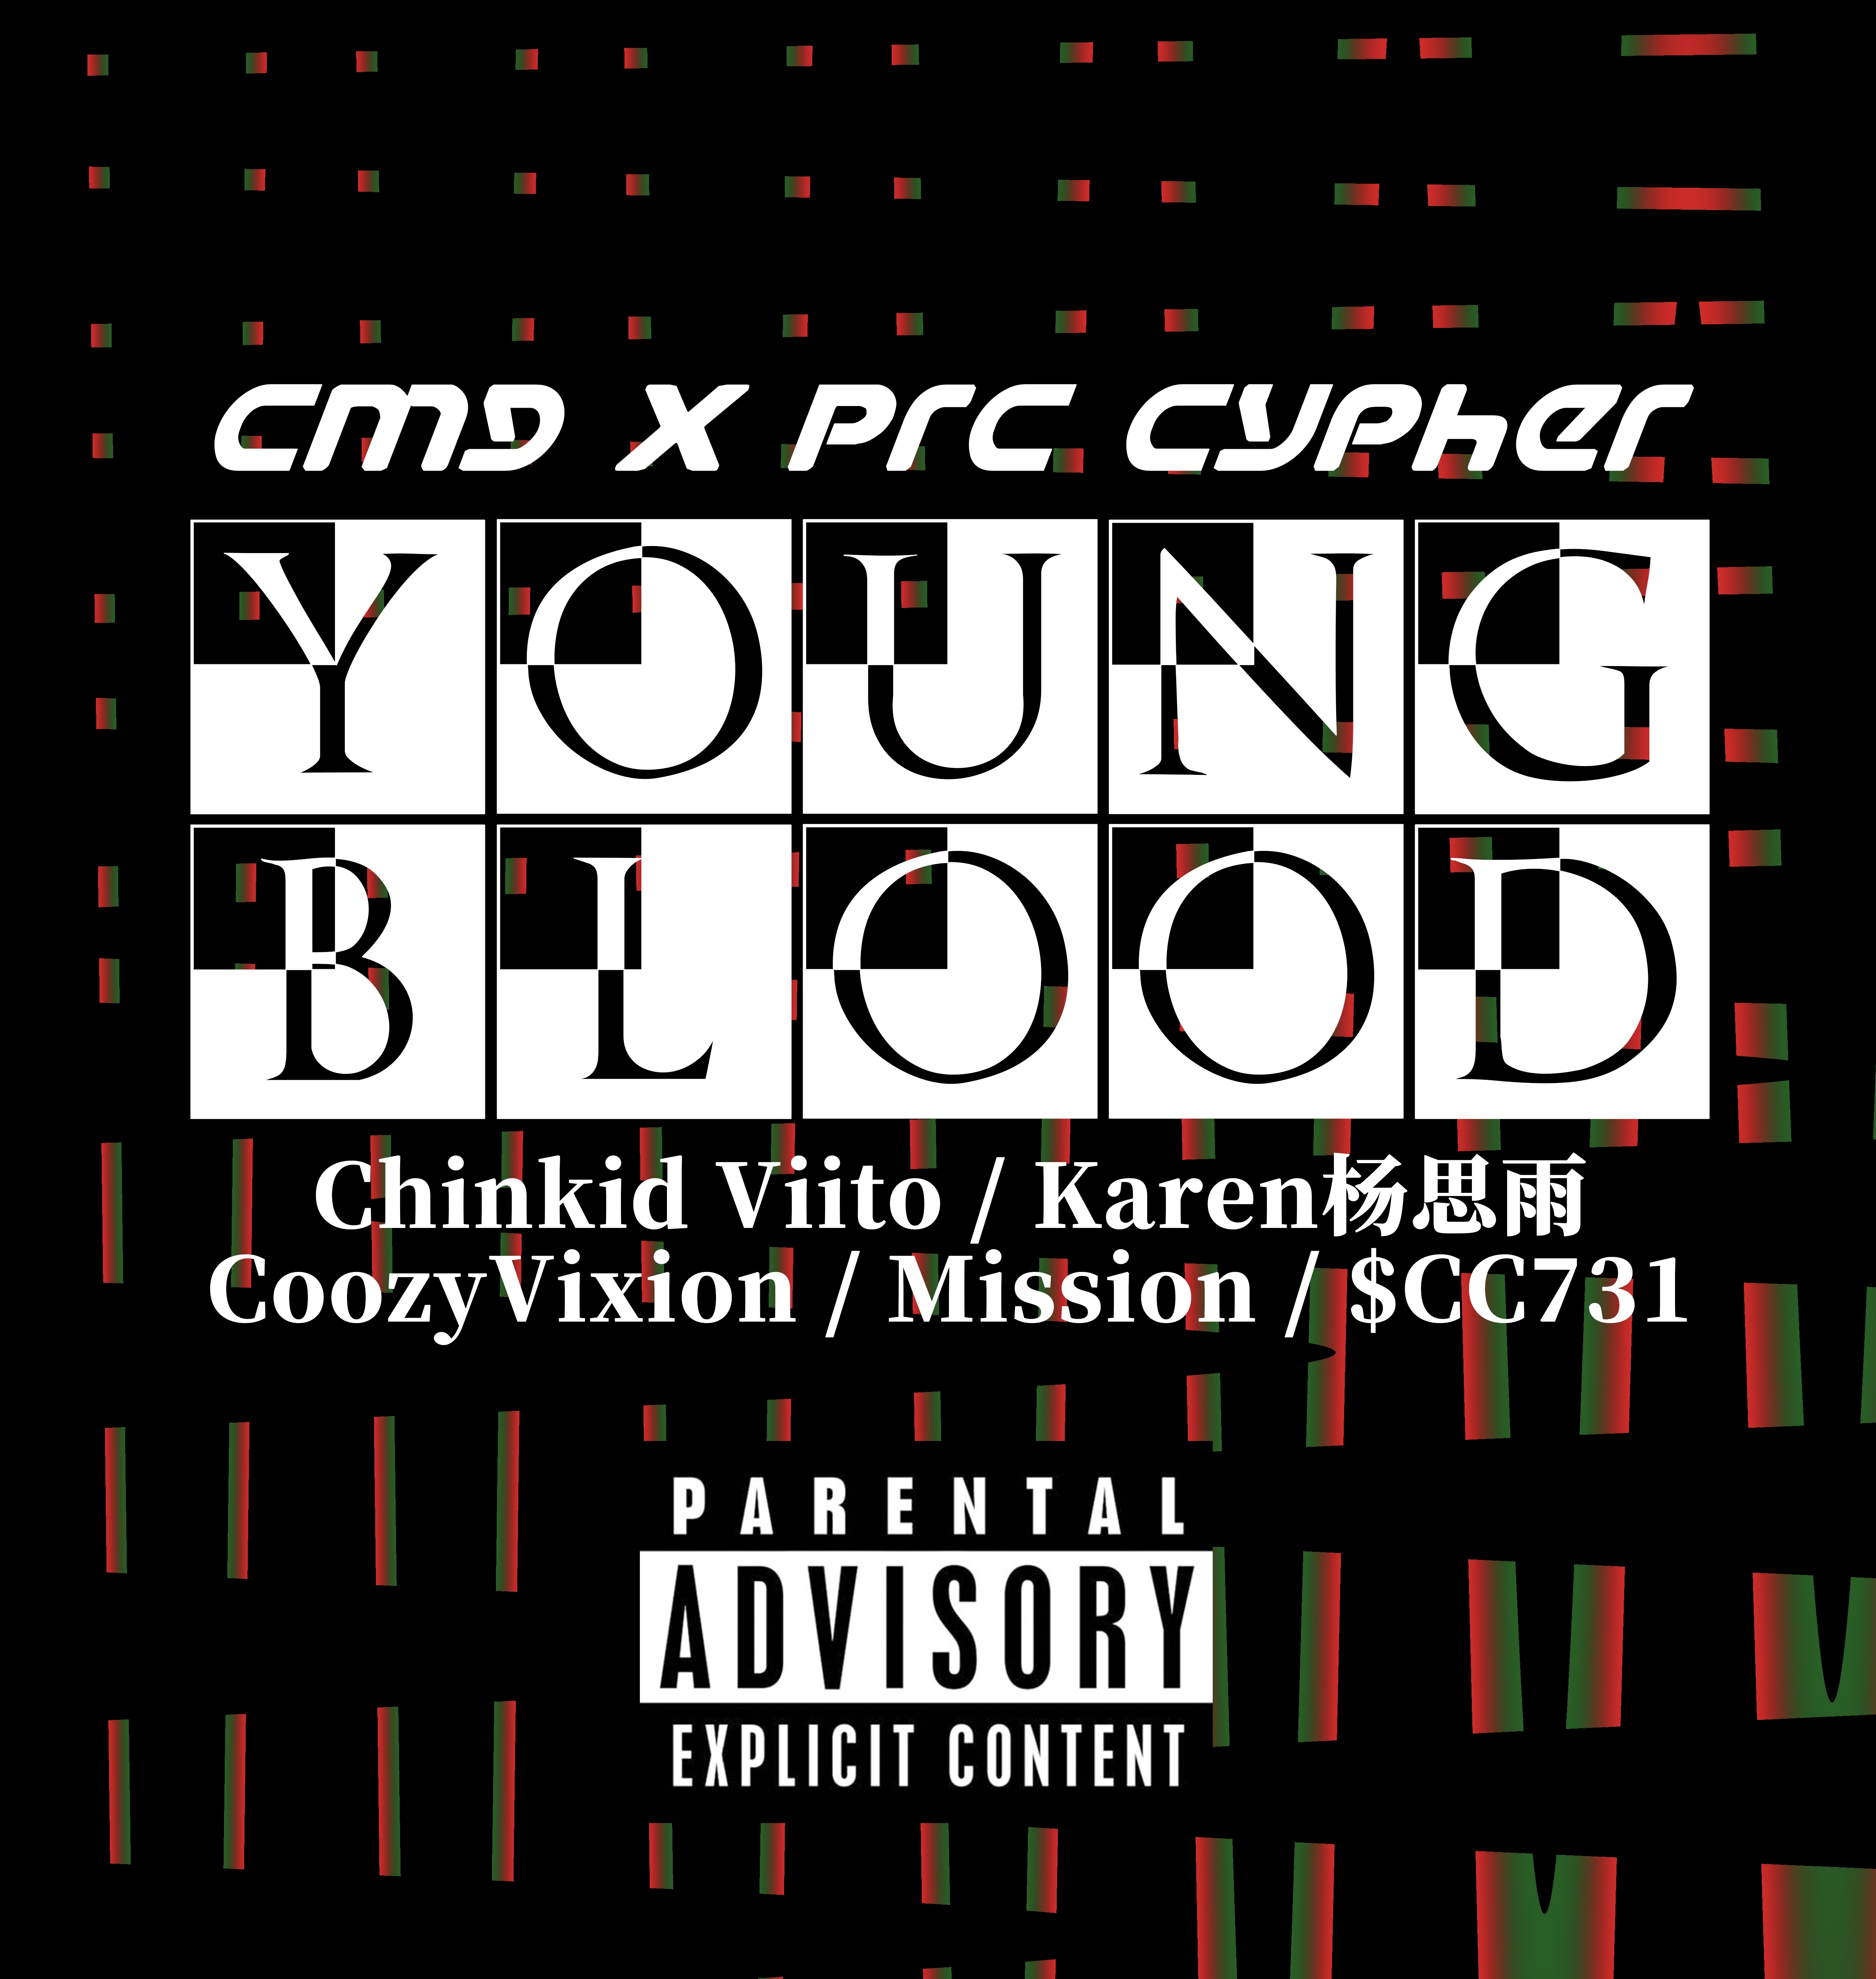 Young Blood(CMGxPRC Cypher prod.by $CC731)